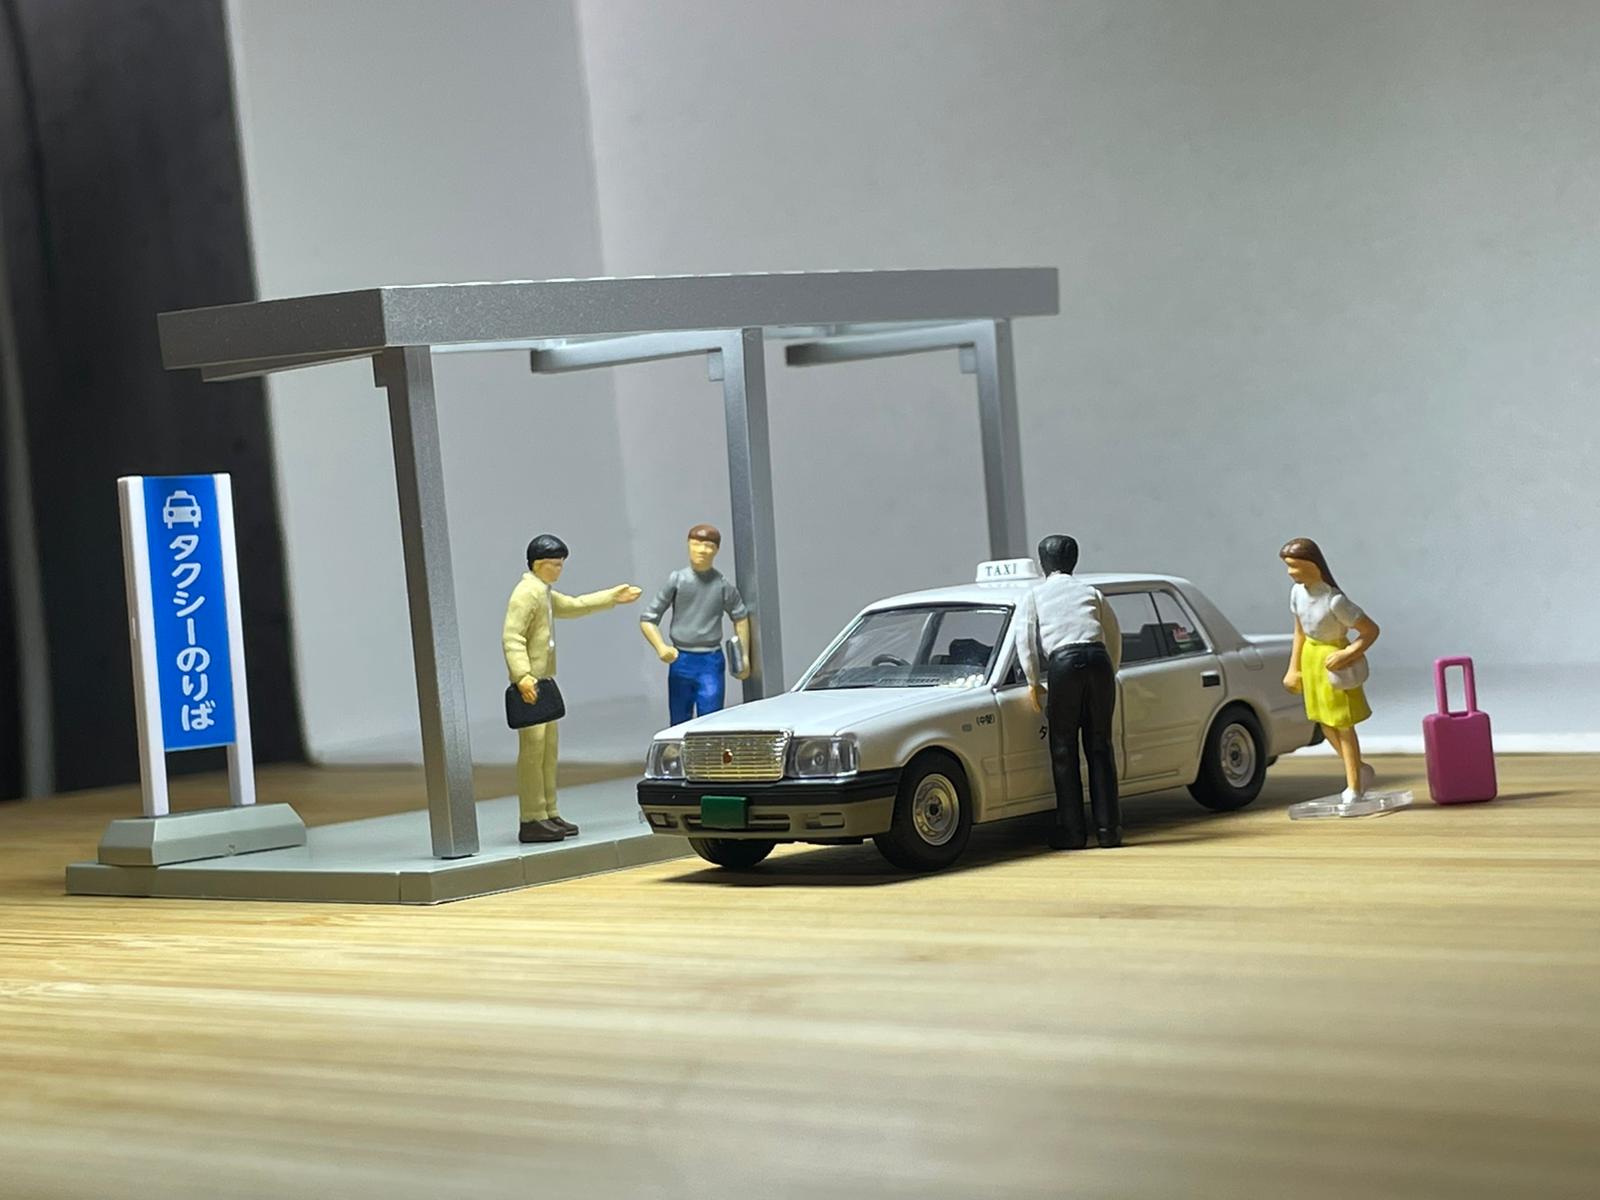 Tomytec Limited Vintage
Neo Diocolle64 Car Snap 04a Taxi station Takara Tomy